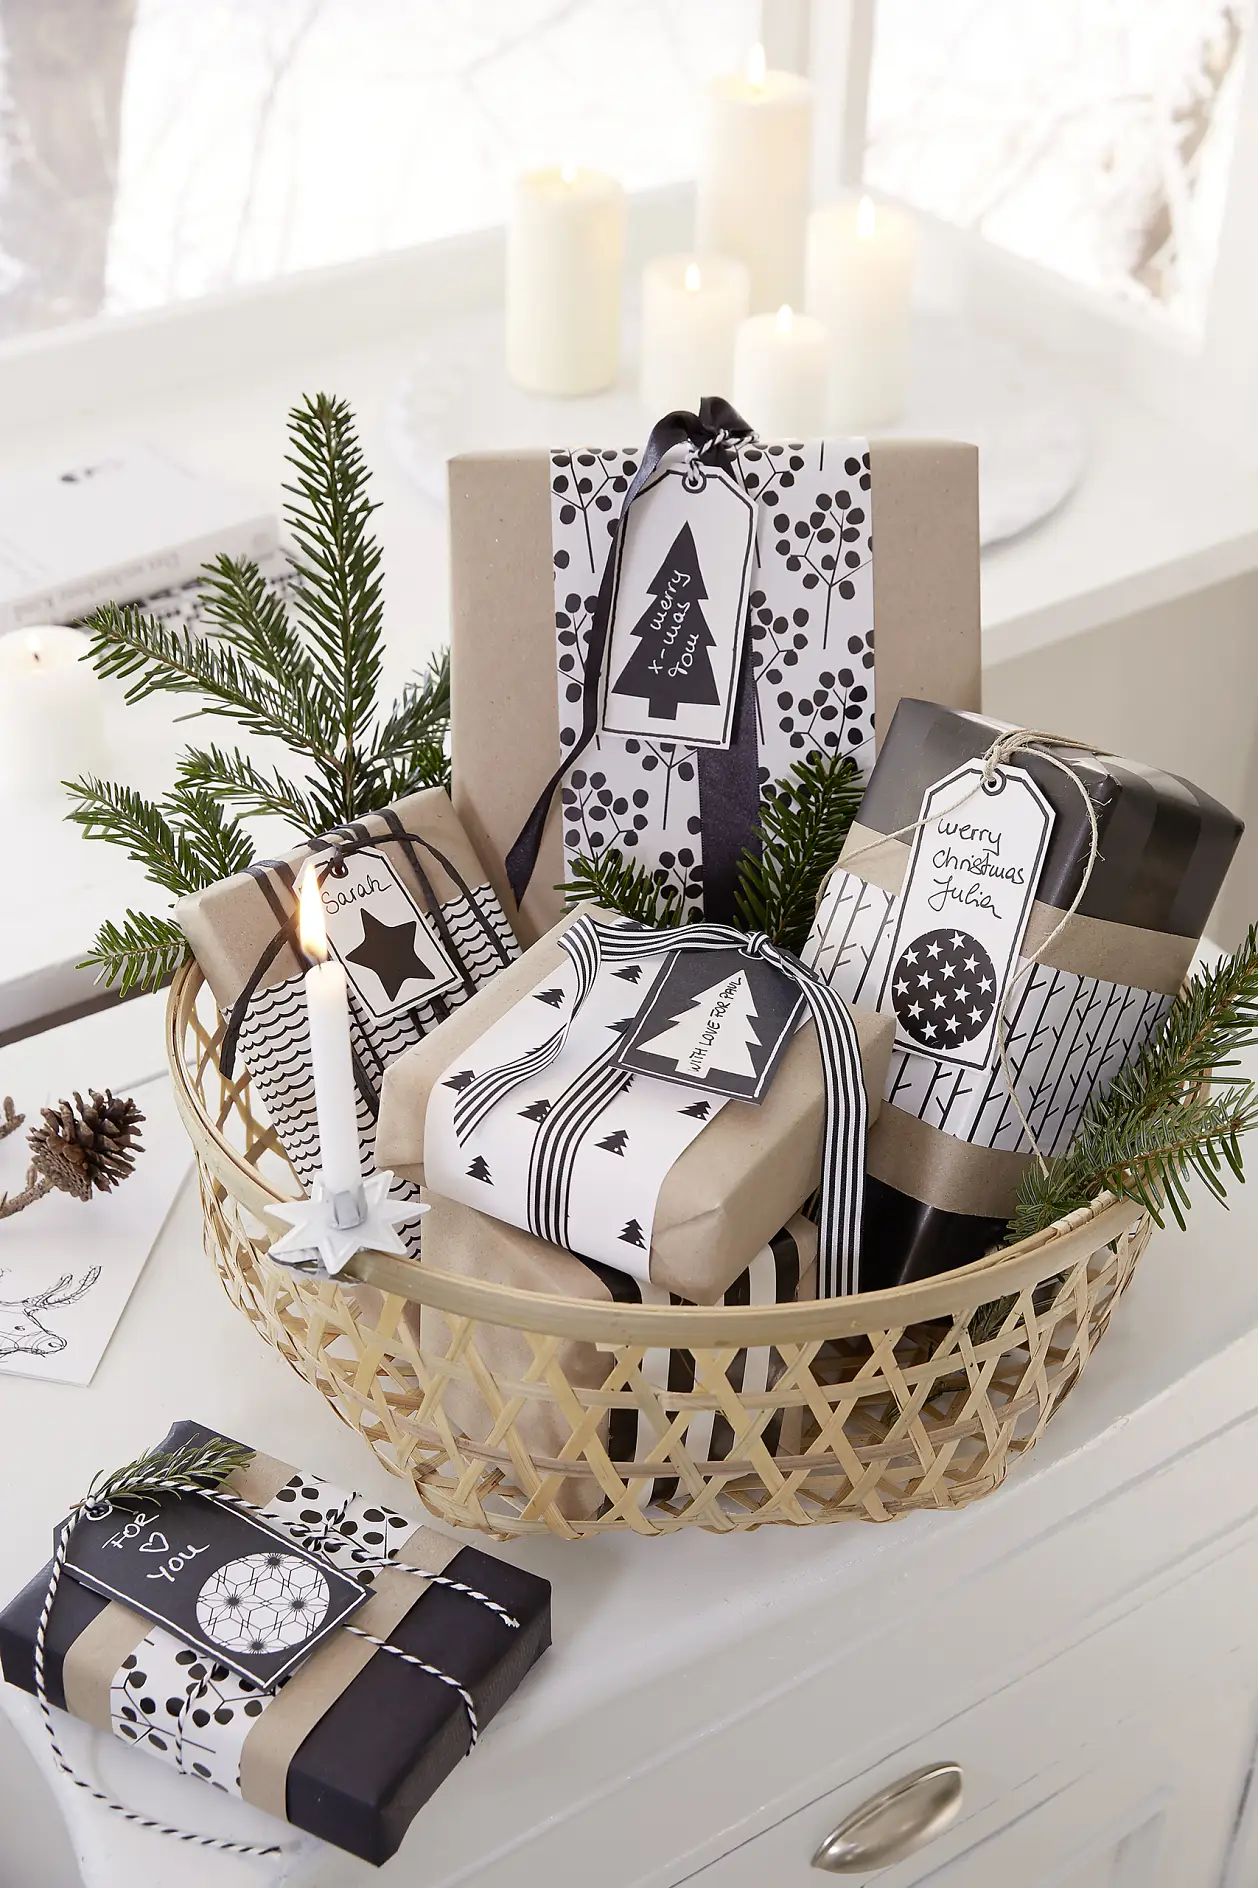 Impress with your self-made gift tags!